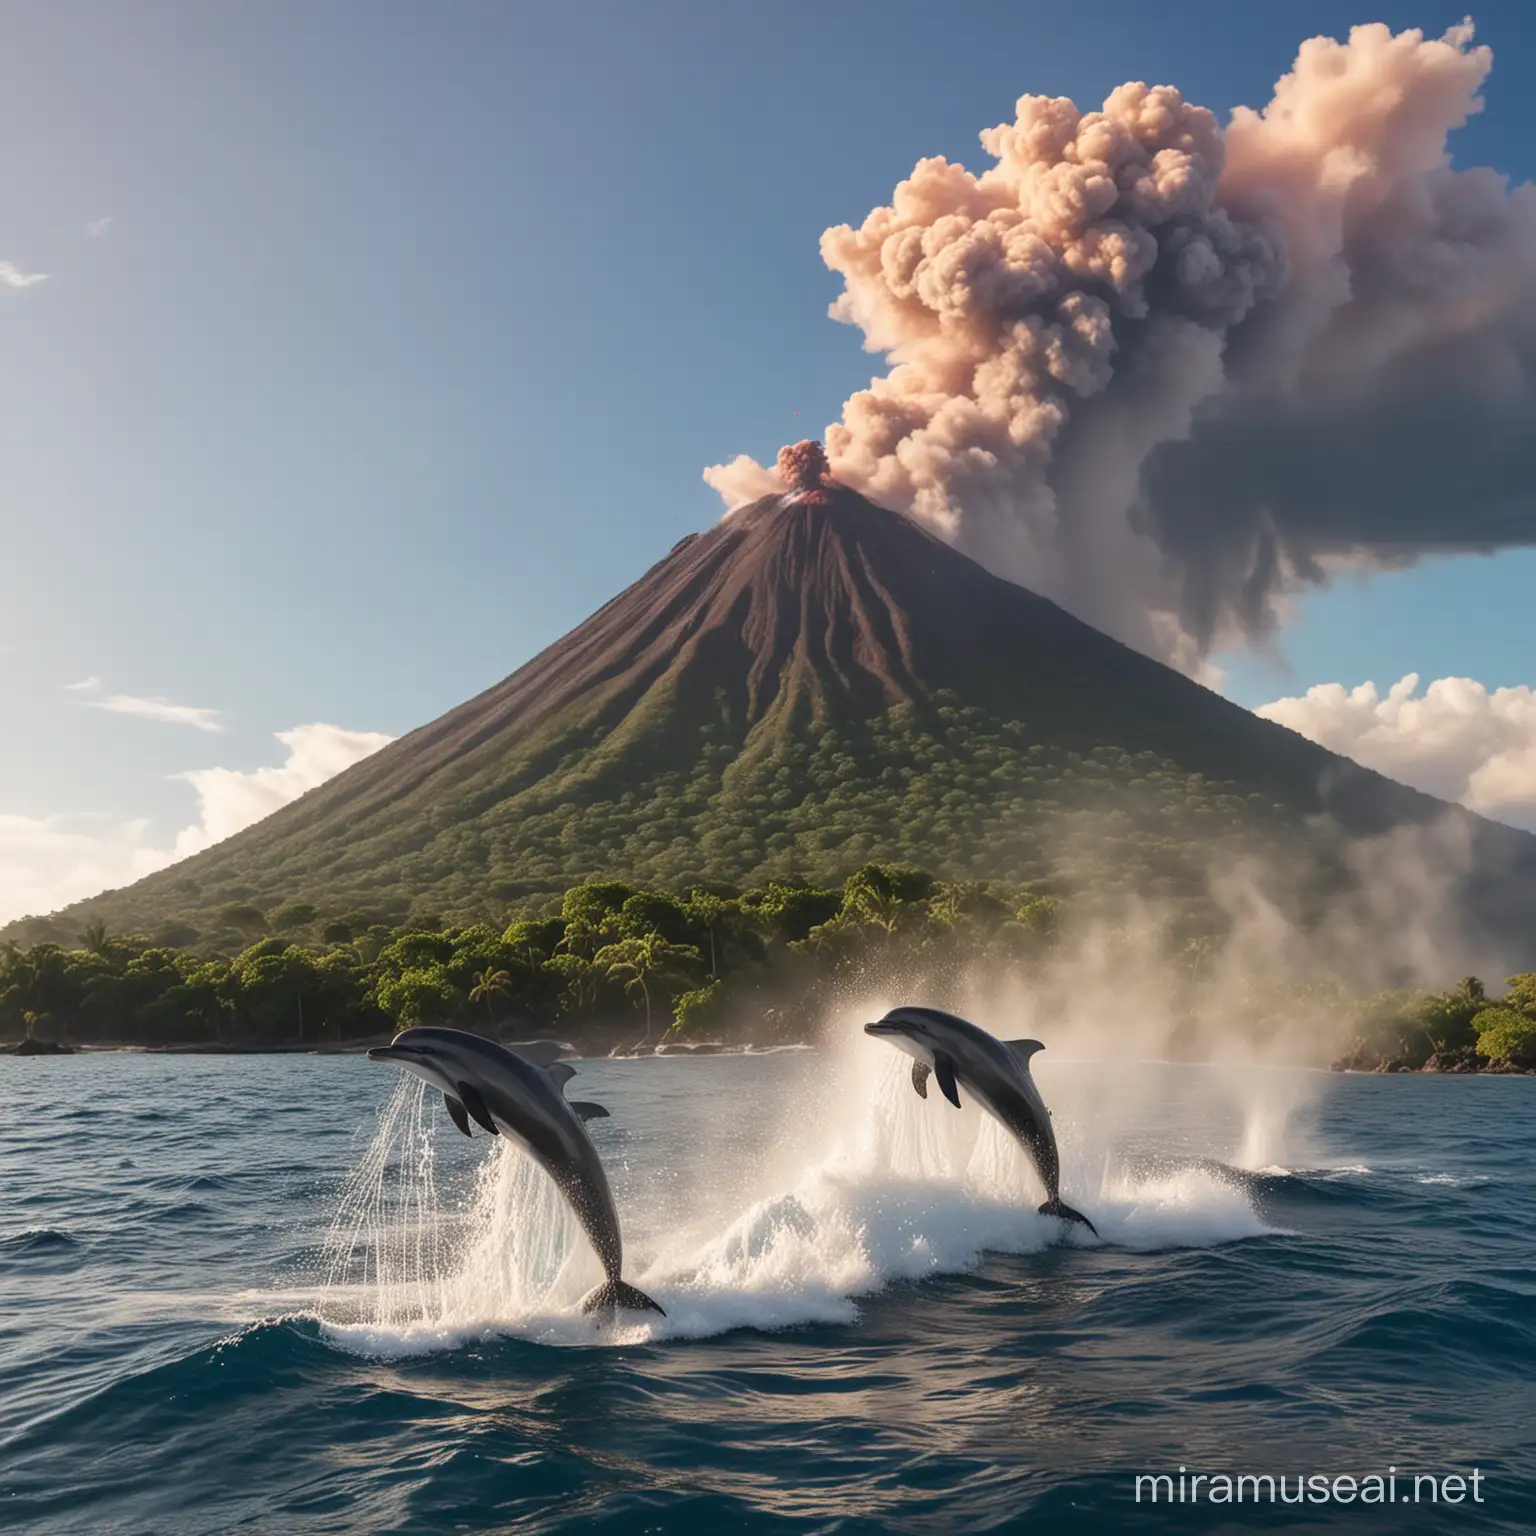 Caribbean Island Paradise with Playful Dolphins and Majestic Volcano